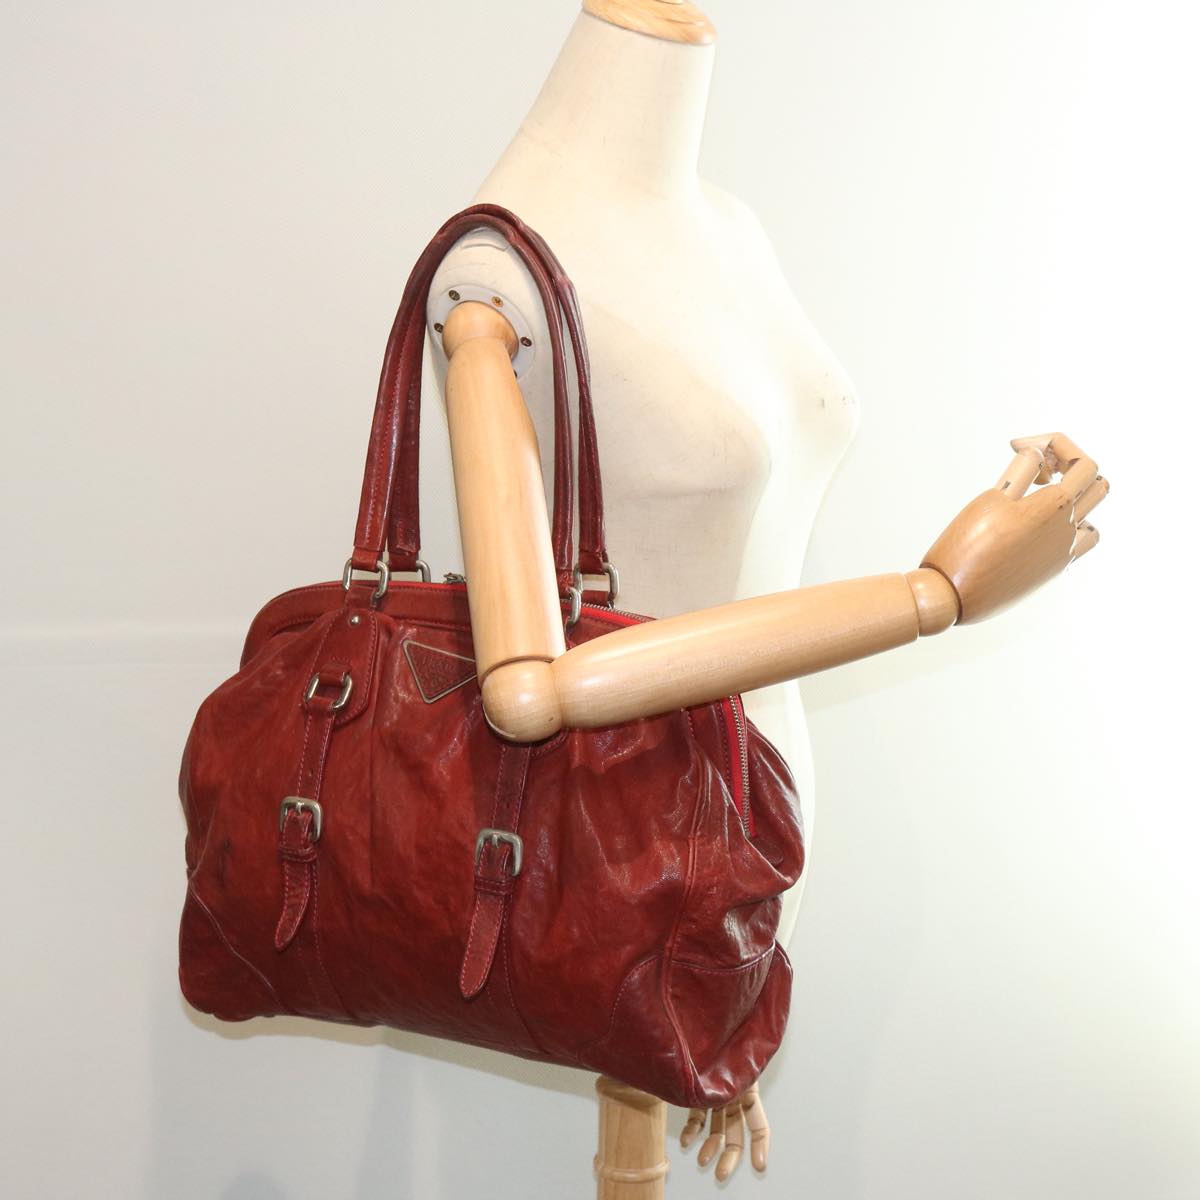 PRADA Hand Bag Leather Red Auth bs12171